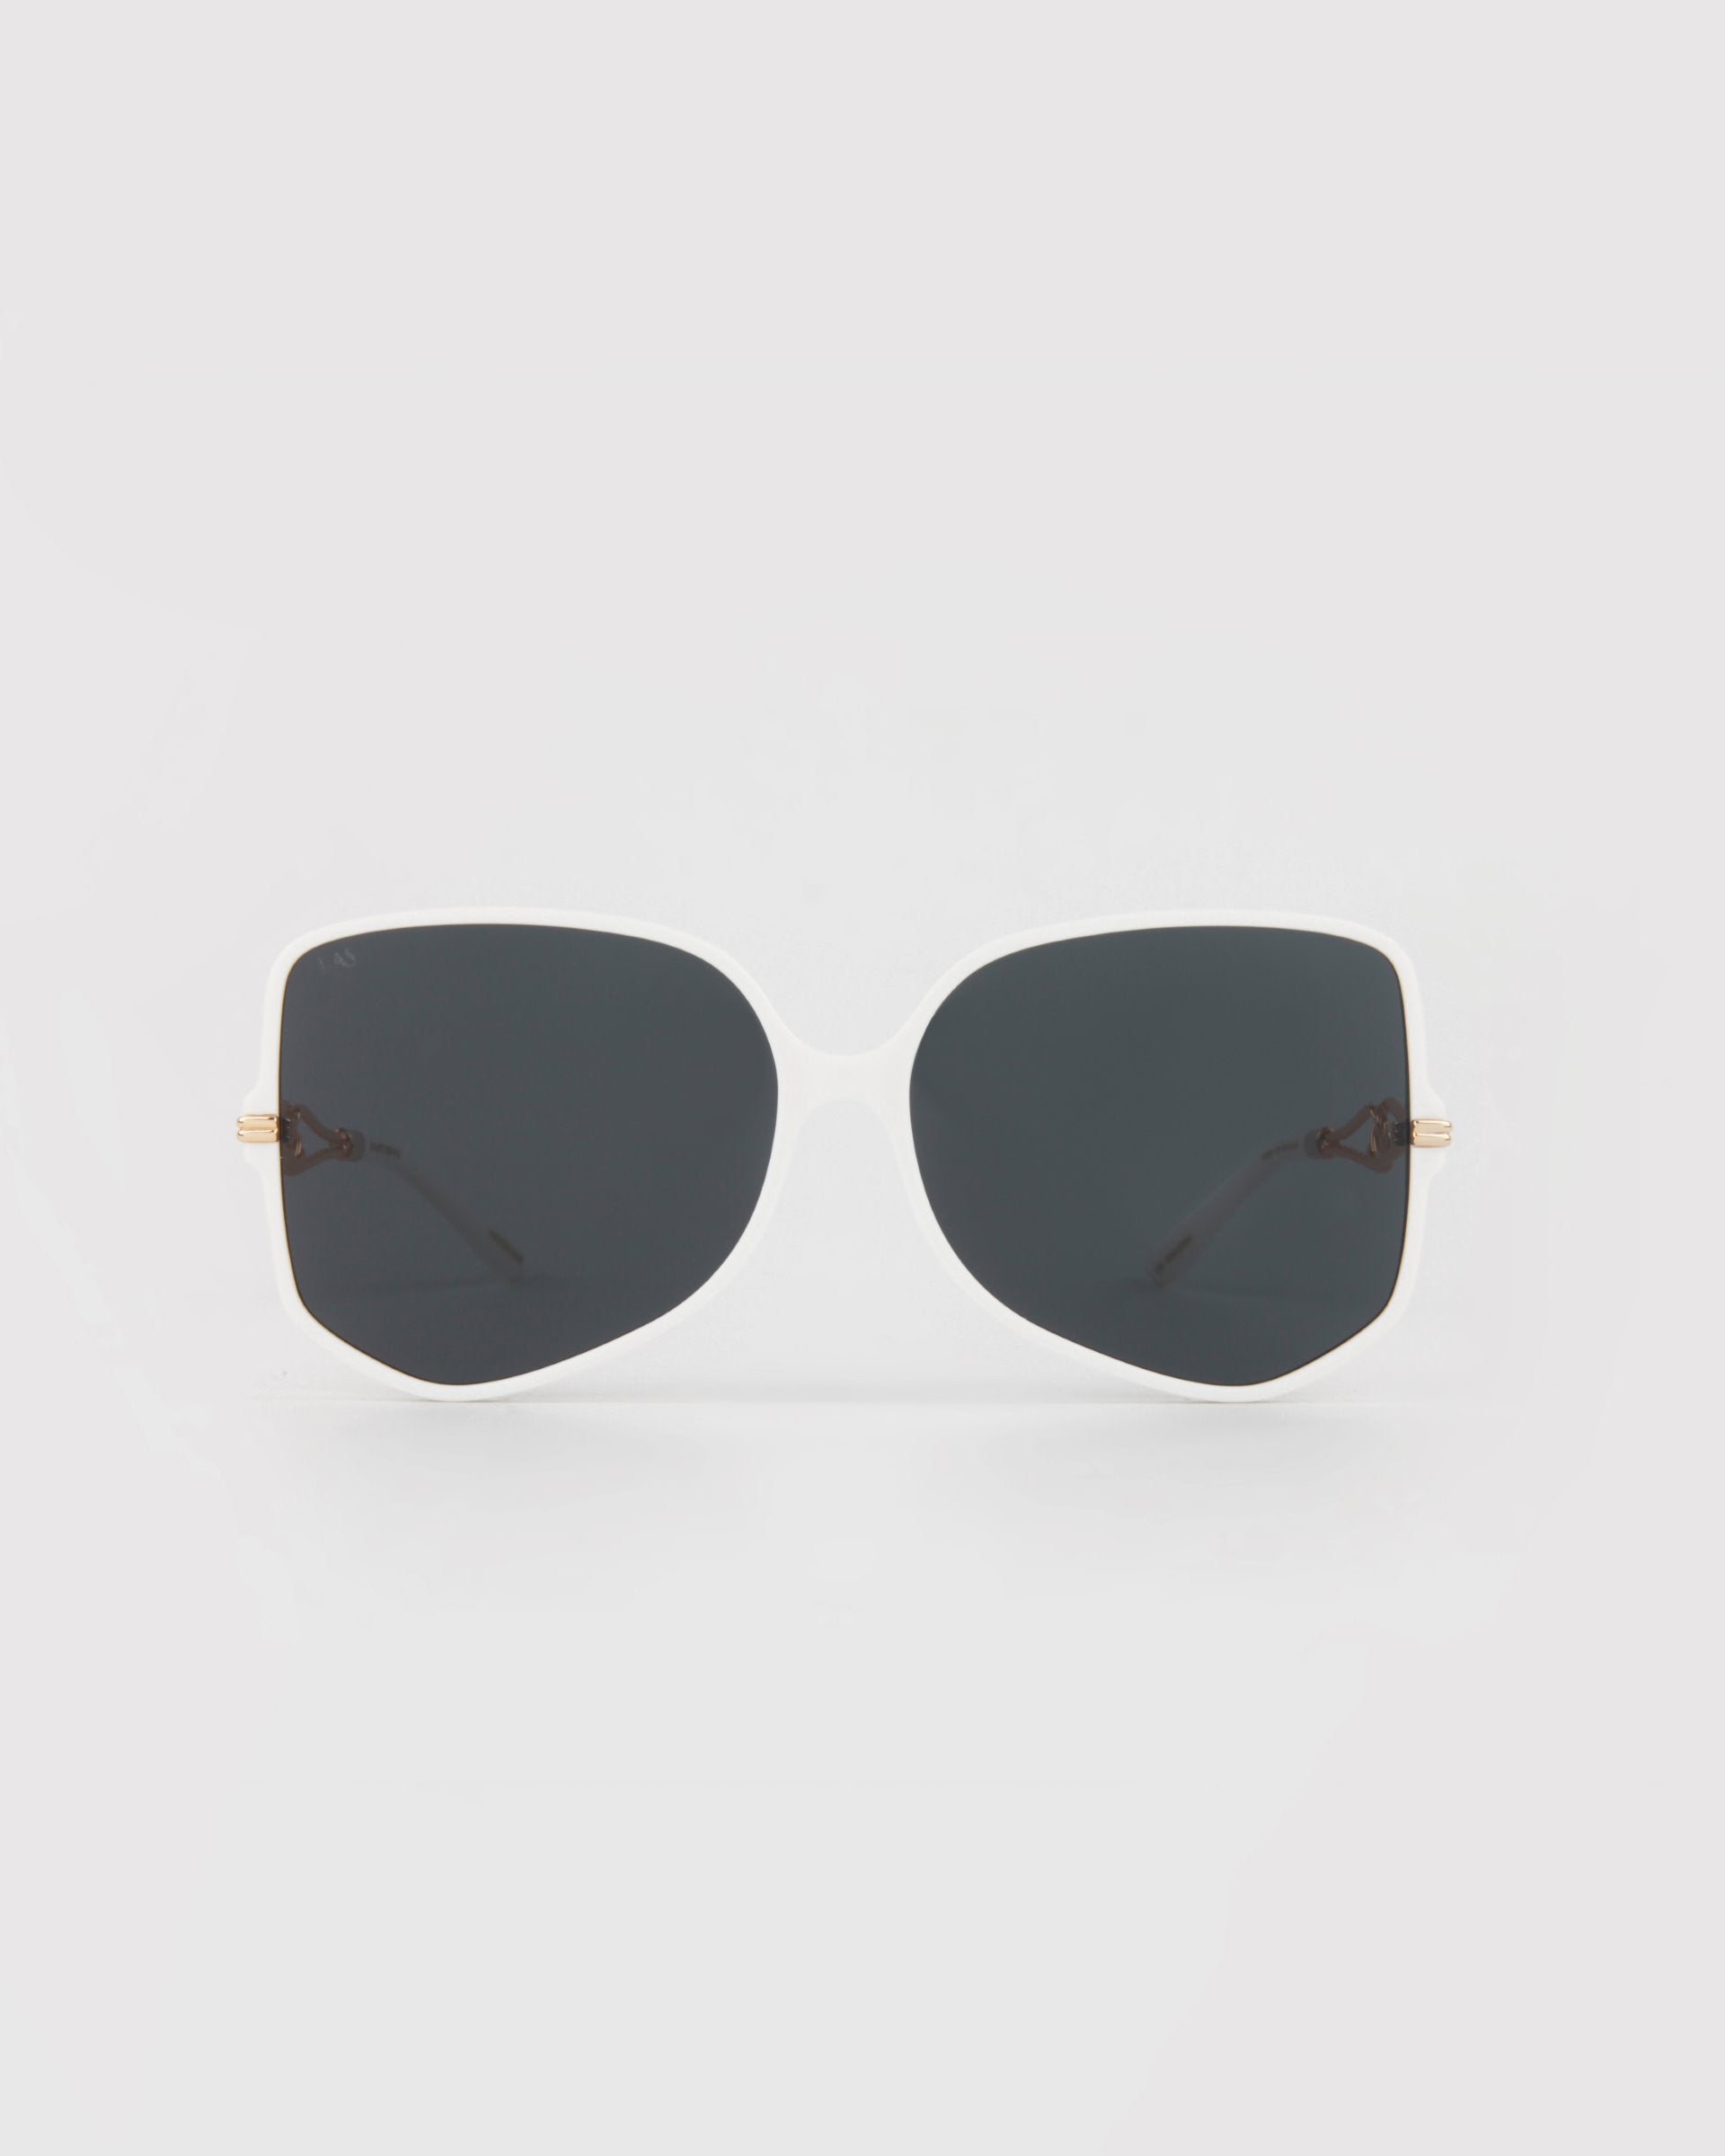 A pair of oversized, square-shaped sunglasses featuring white frames and black lenses. With thin, gold-plated arms and dark-colored temple tips, these minimalistic and modern Voyager by For Art's Sake® sunglasses offer stylish excellence. Perfectly crafted from handmade acetate eyewear, they provide both UVA & UVB protection.